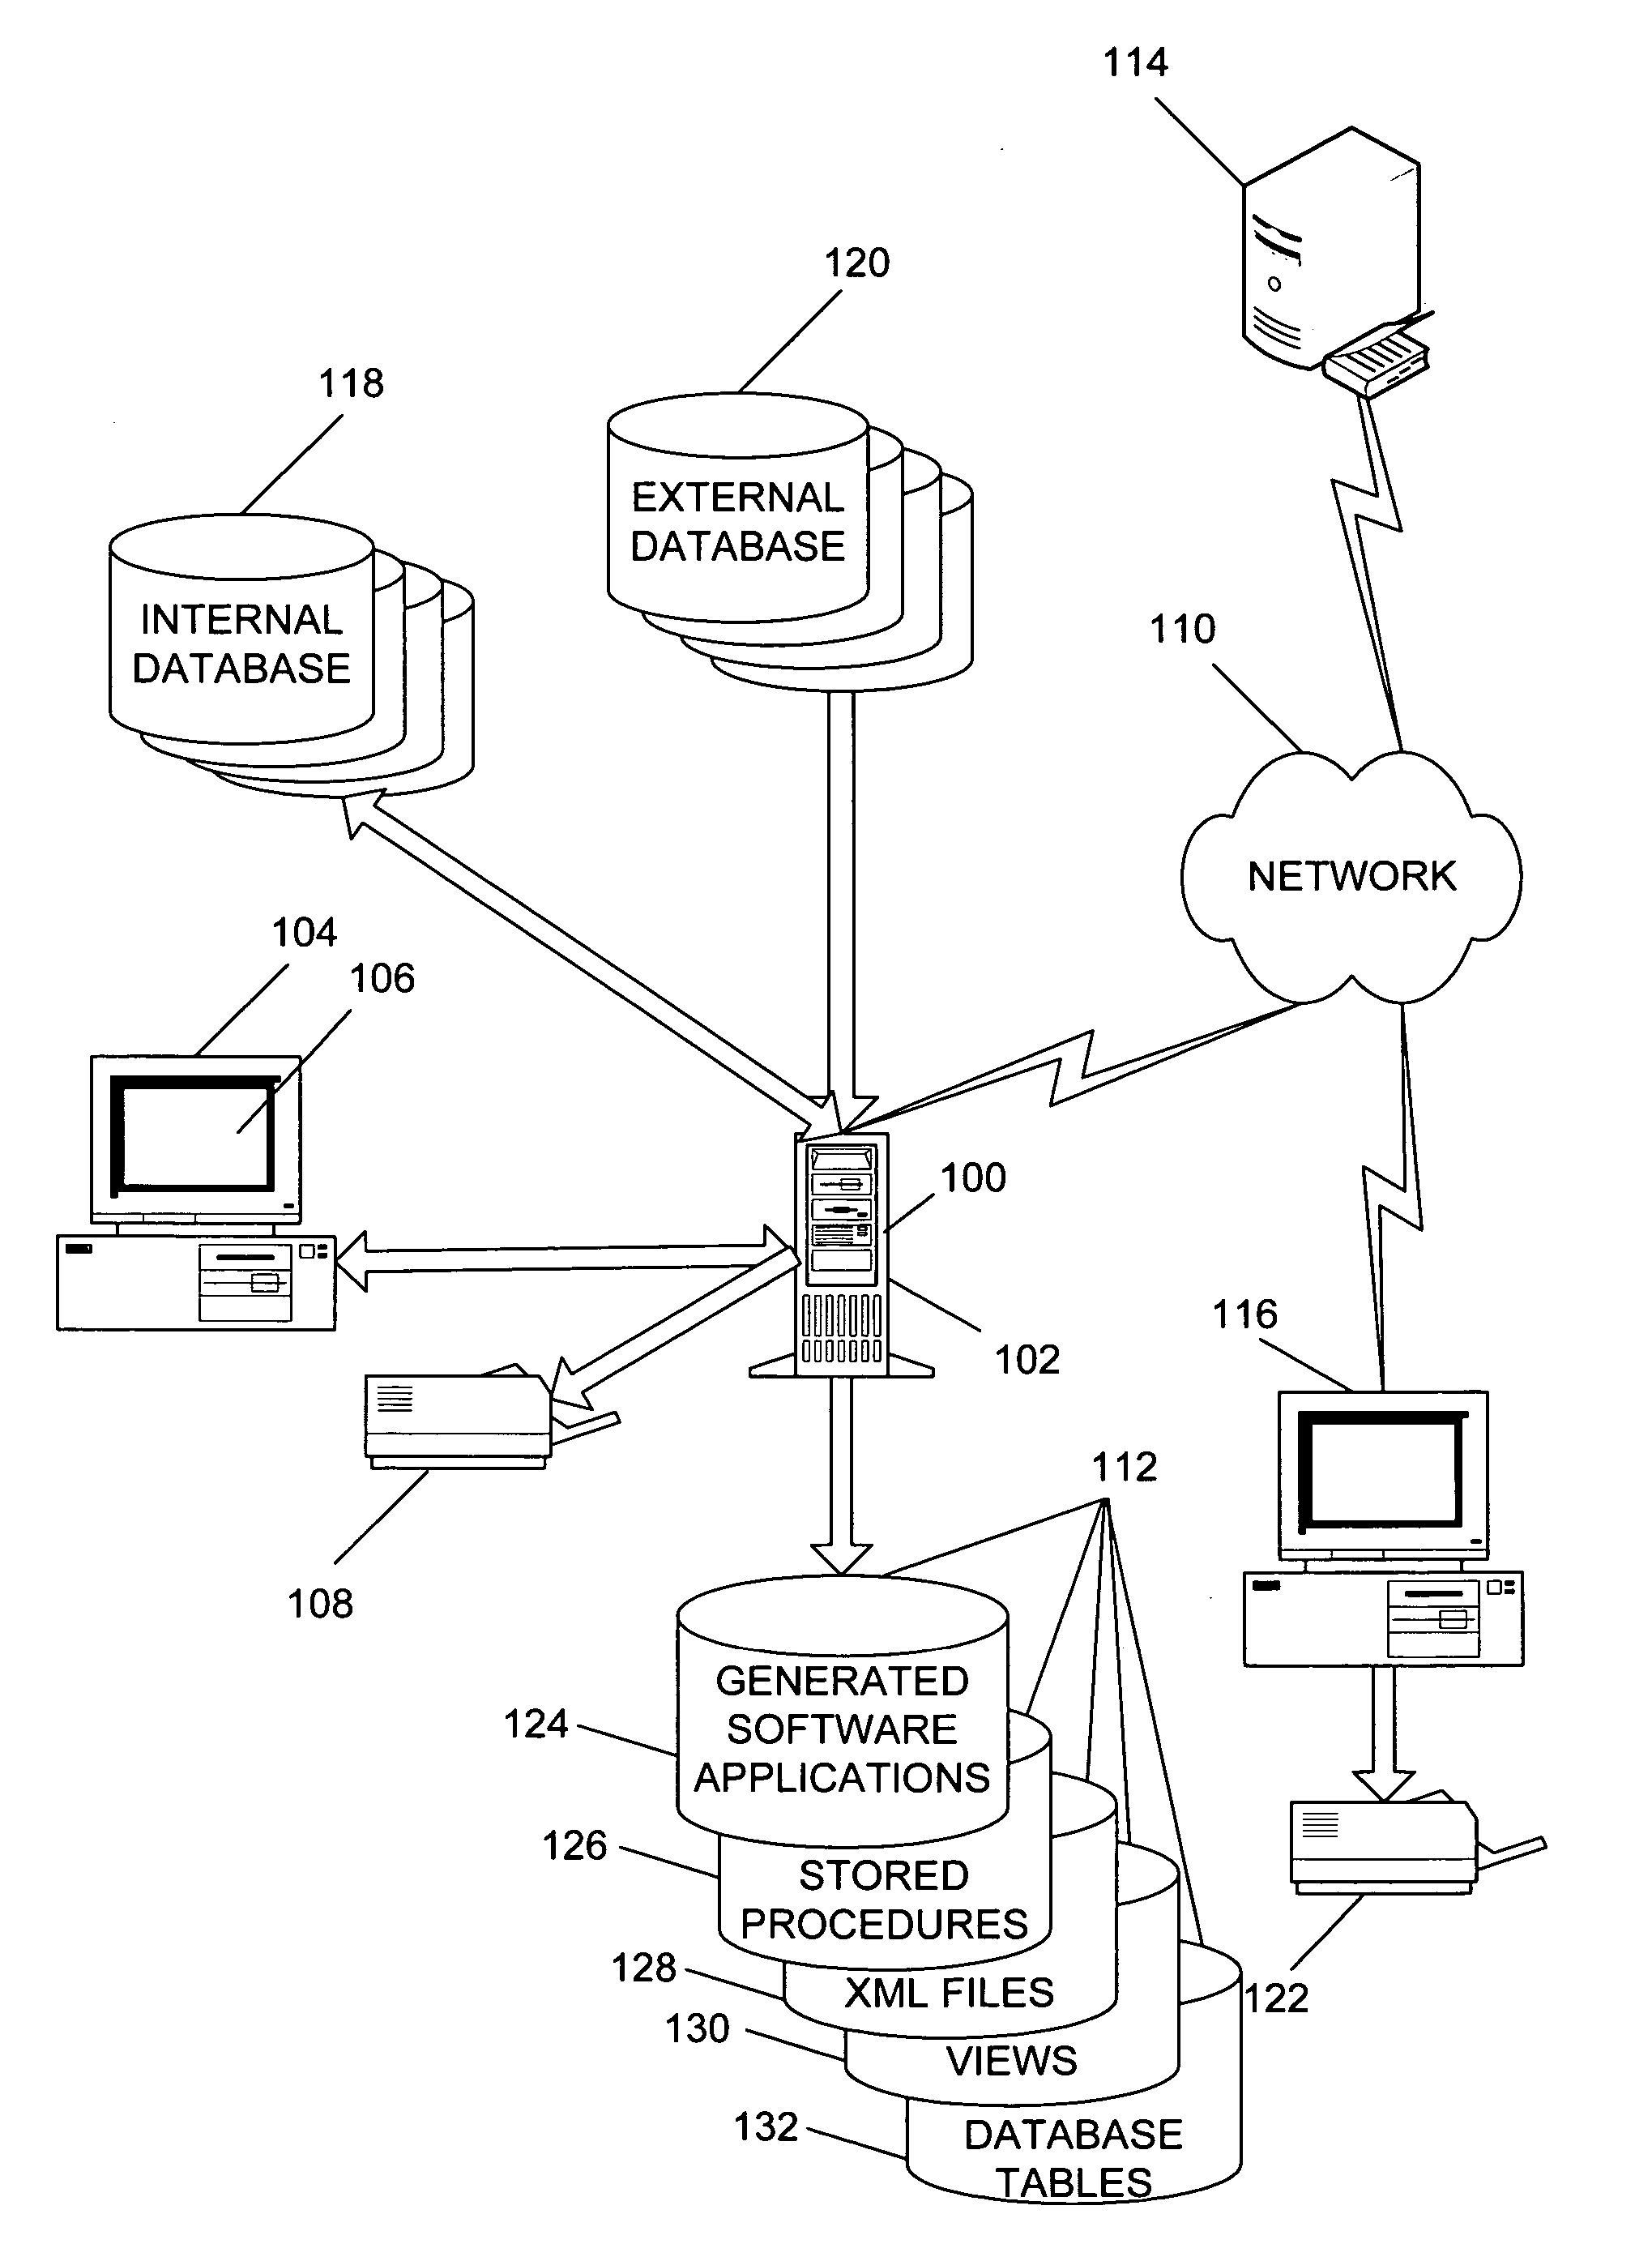 System and method for generating and deploying a software application